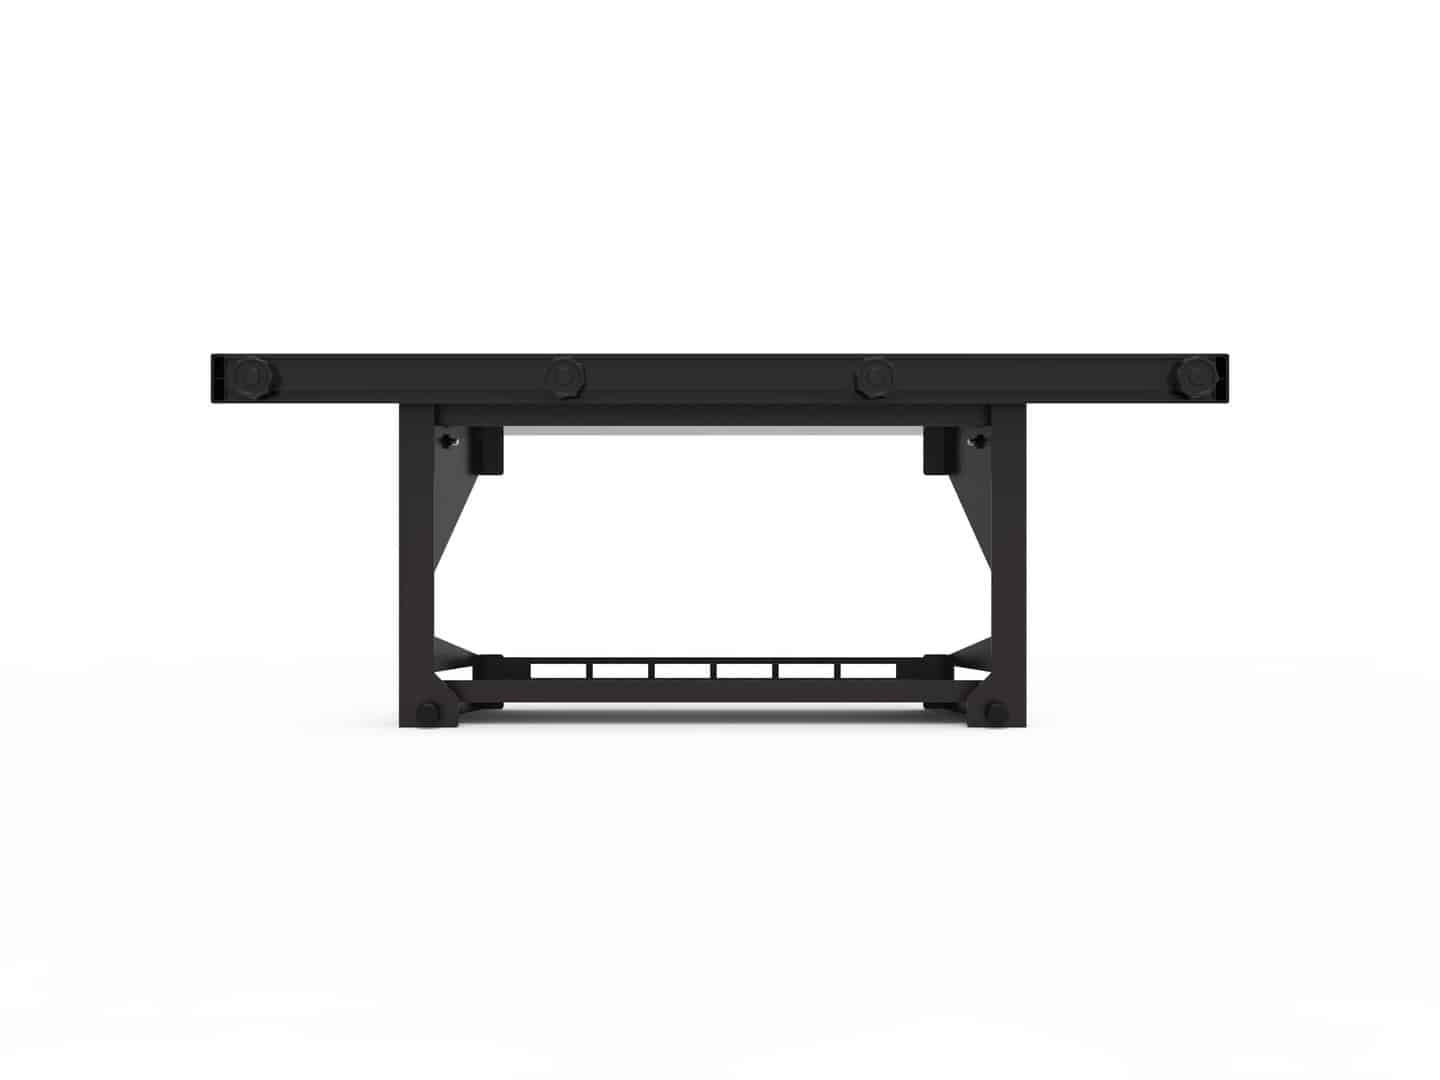 Grizzly Approach Blind Shelf